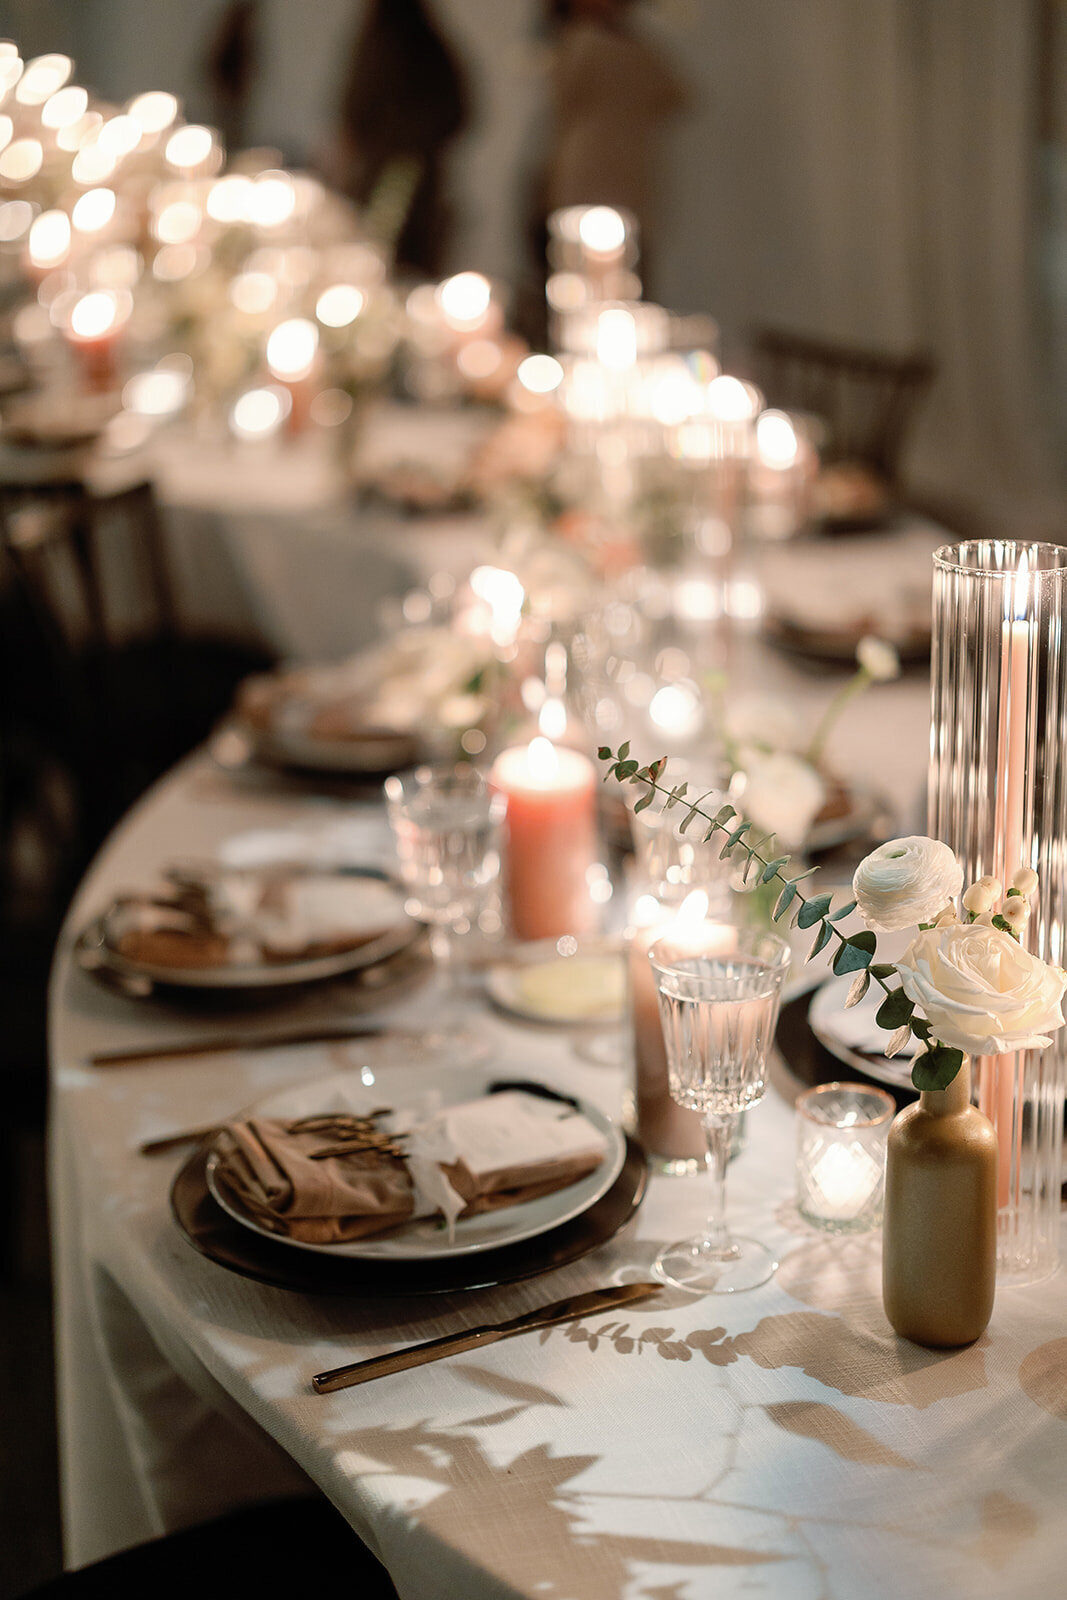 Kate-Murtaugh-Events-warehouse-wedding-planner-serpentine-table-flowers-candlelight